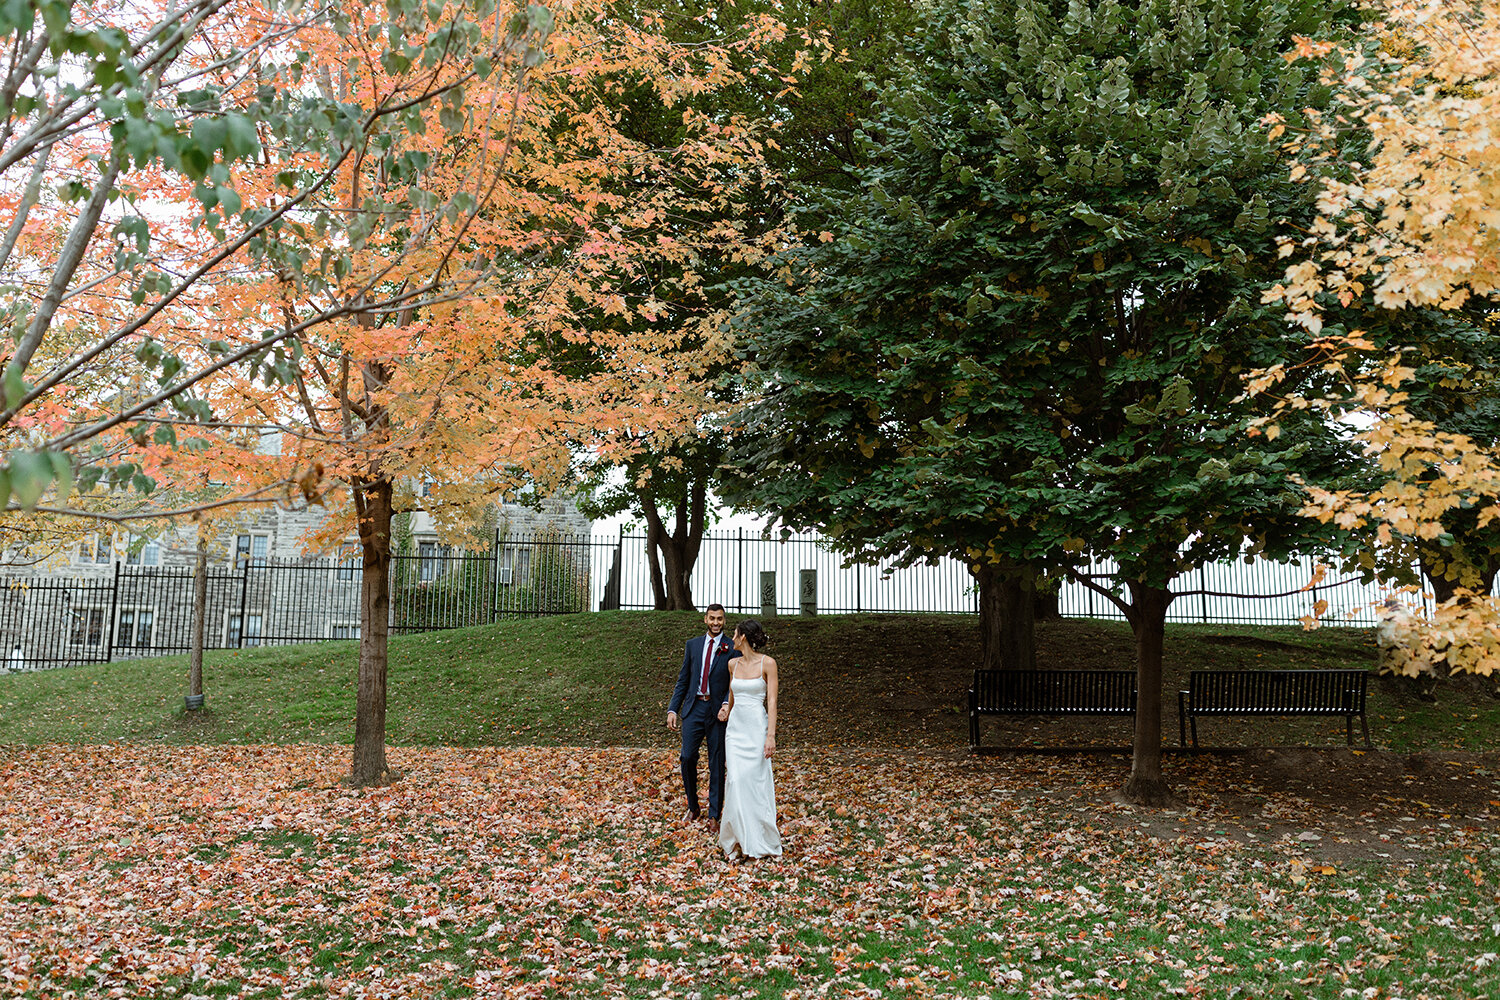 Small-Intimate-Elopement-Downtown-Toronto-U-of-T-Vows-where-to-elope-in-toronto-24.JPG